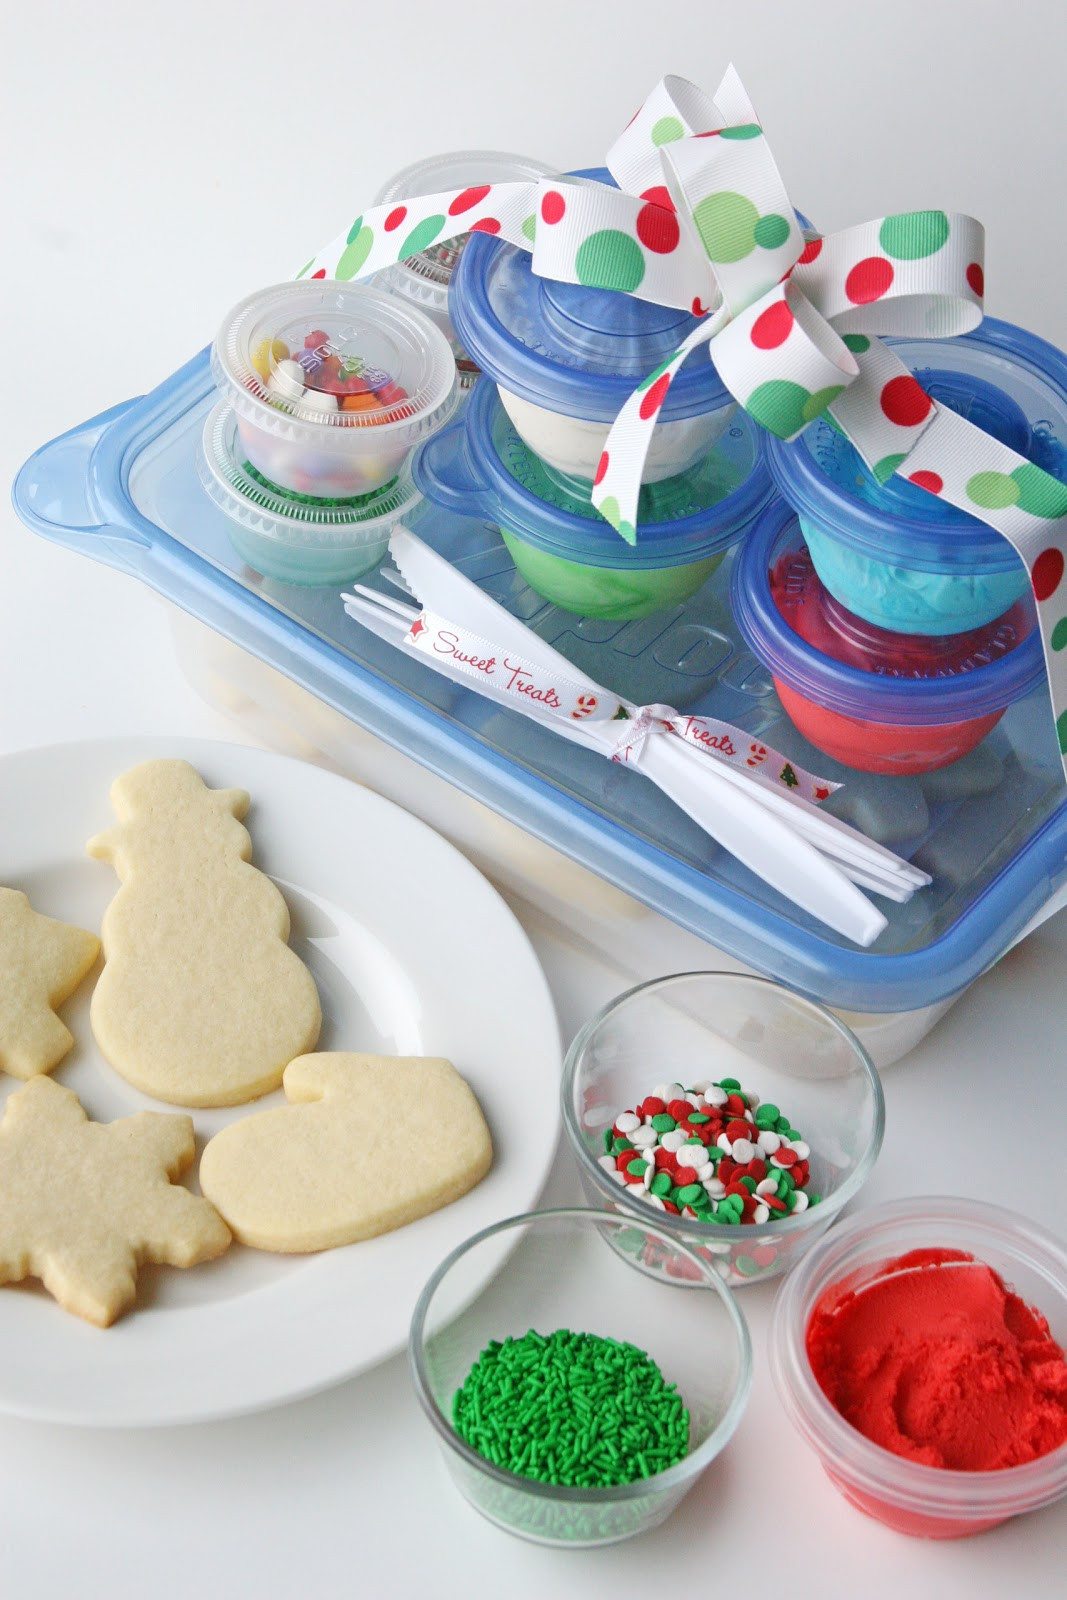 Christmas Cookies Decorating Kits
 Cookie Decorating Kits for Kids and Easy Butter Frosting